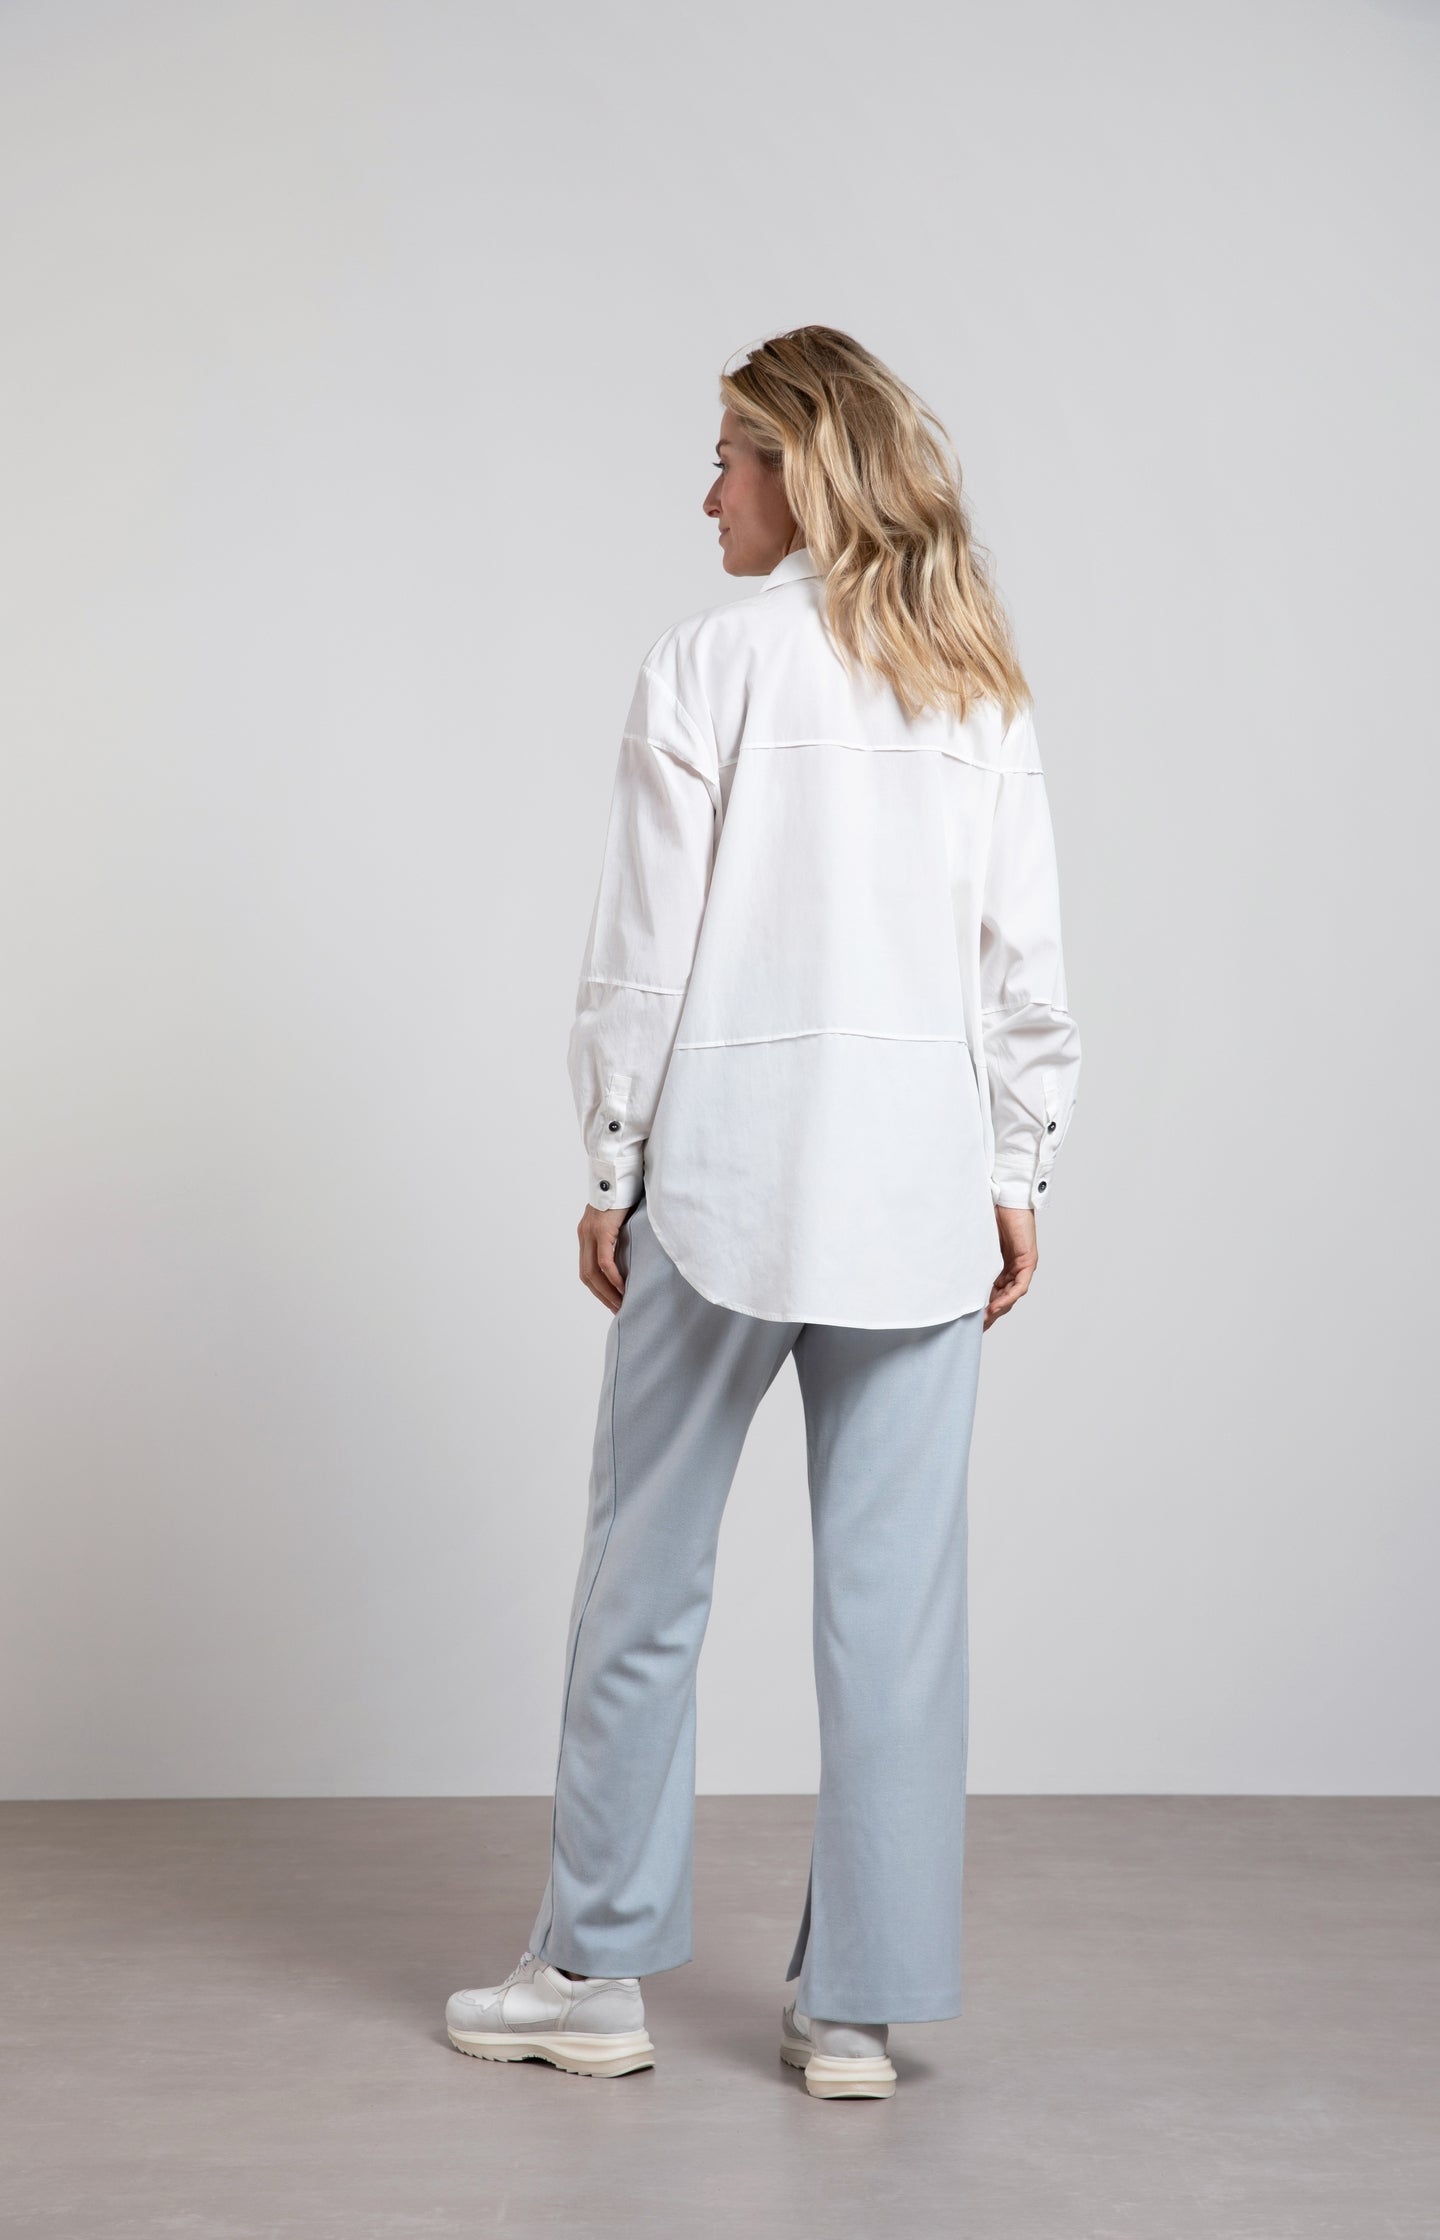 Oversized blouse with long sleeves, buttons and seam details